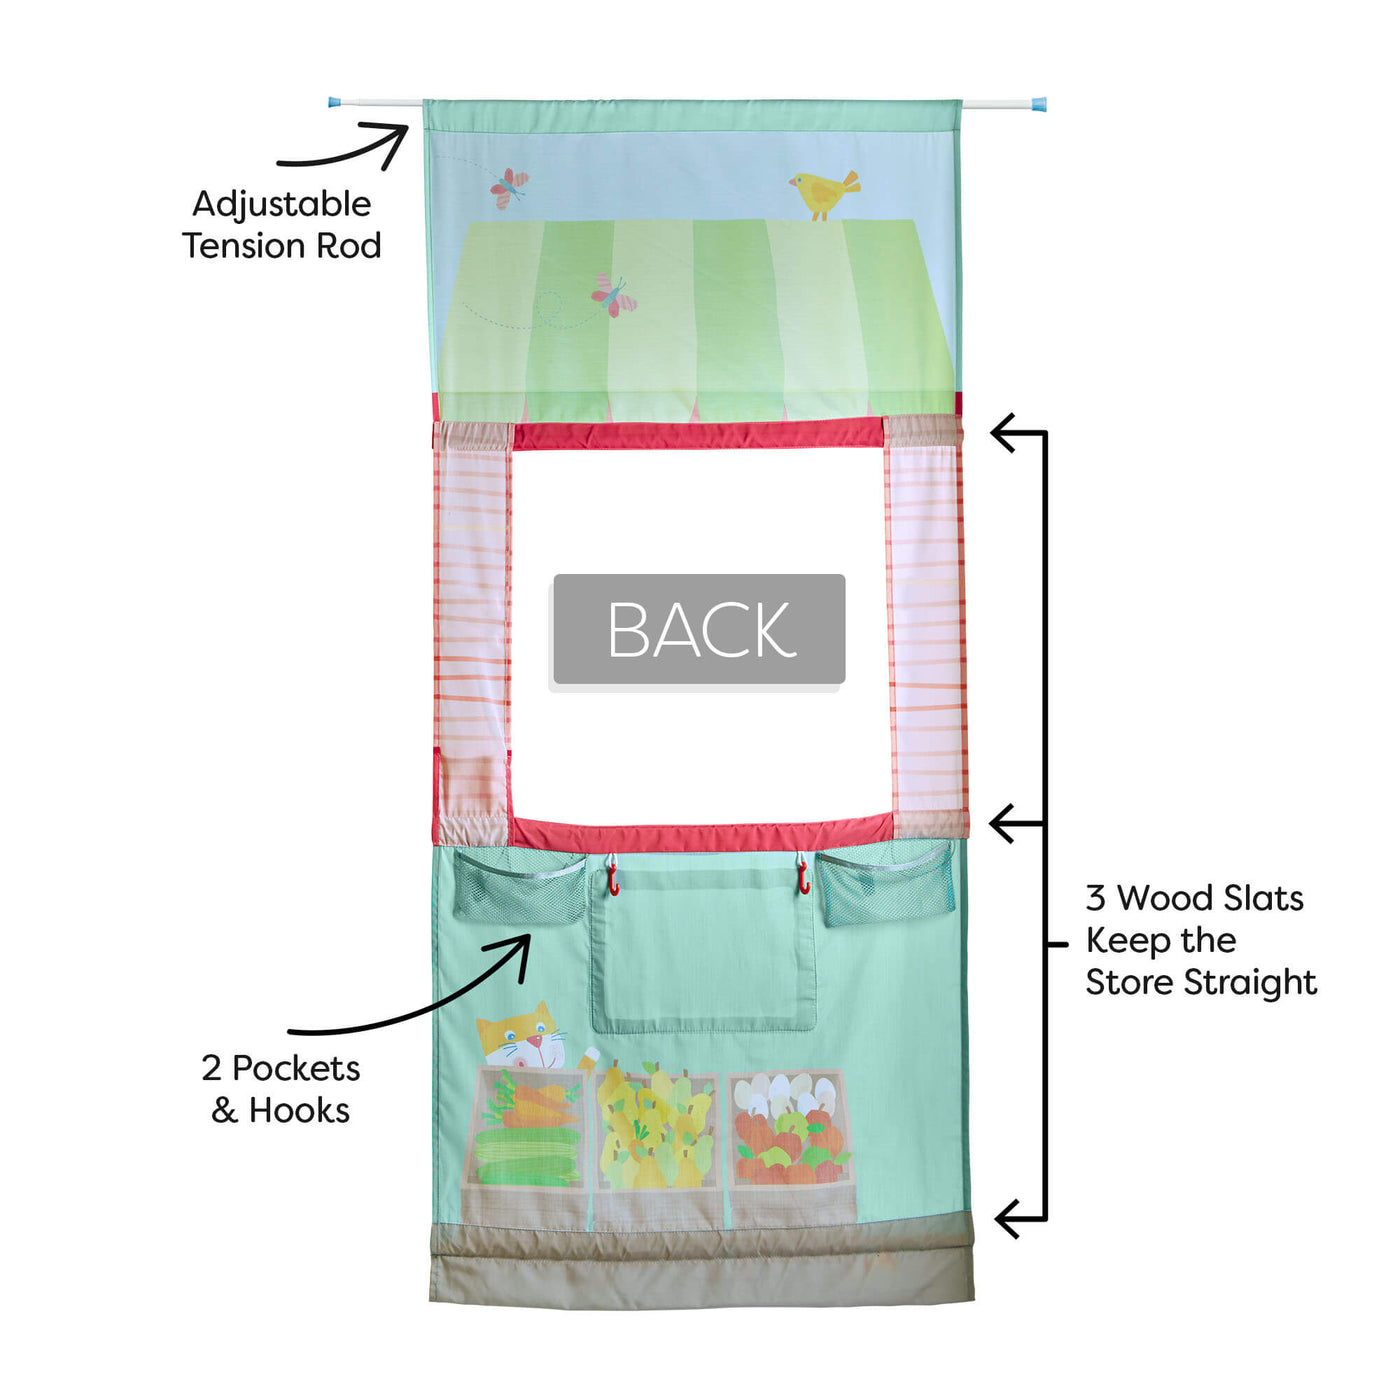 HABA Hanging Doorway Play Store back has 3 wood slats to keep the store straight, 2 pockets and hooks, and an adjustable tension rod